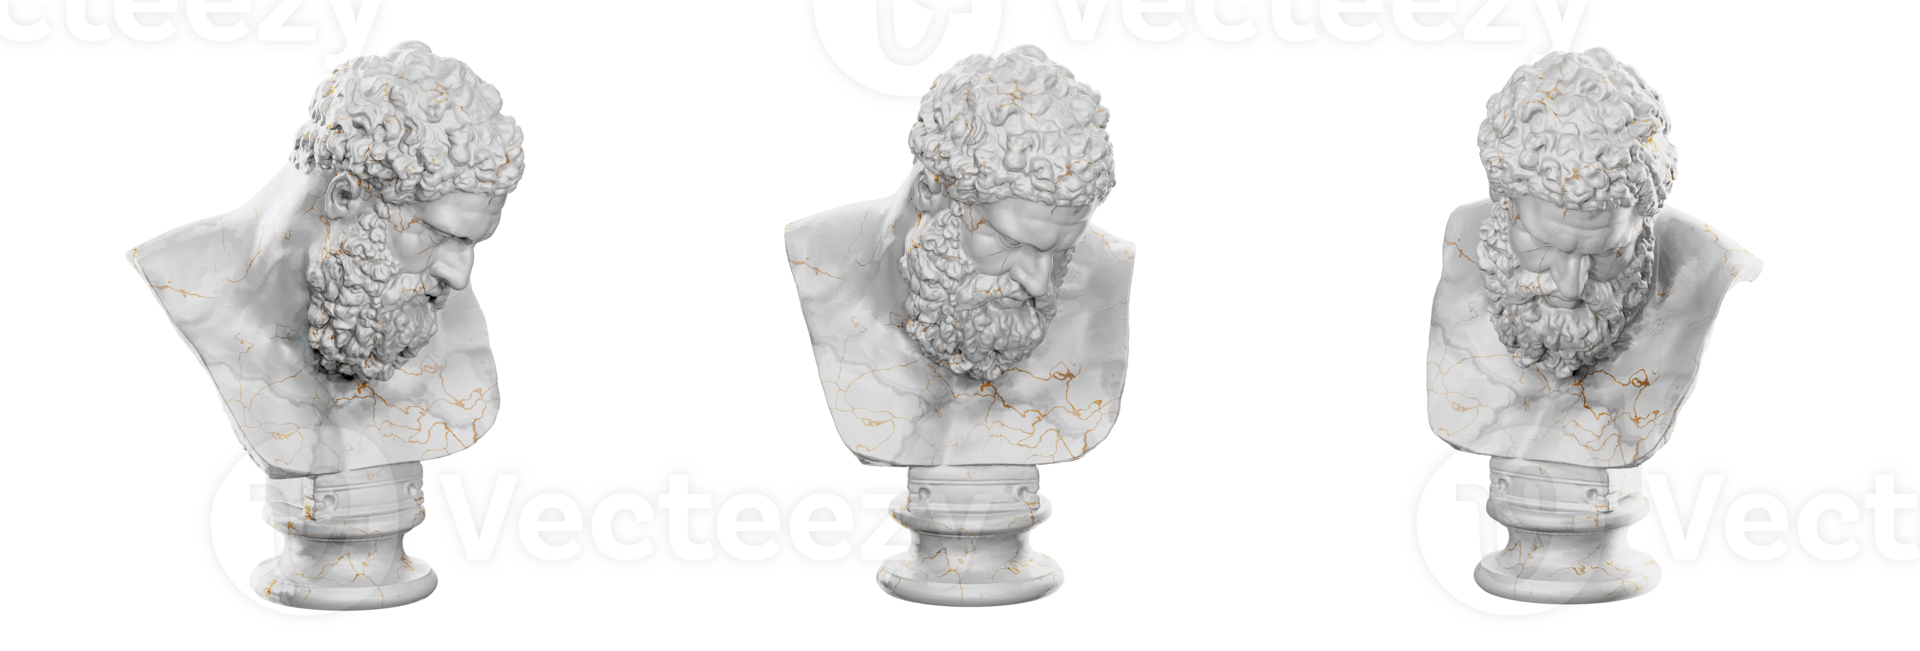 Magnificent 3D render of the Farnese Hercules bust png